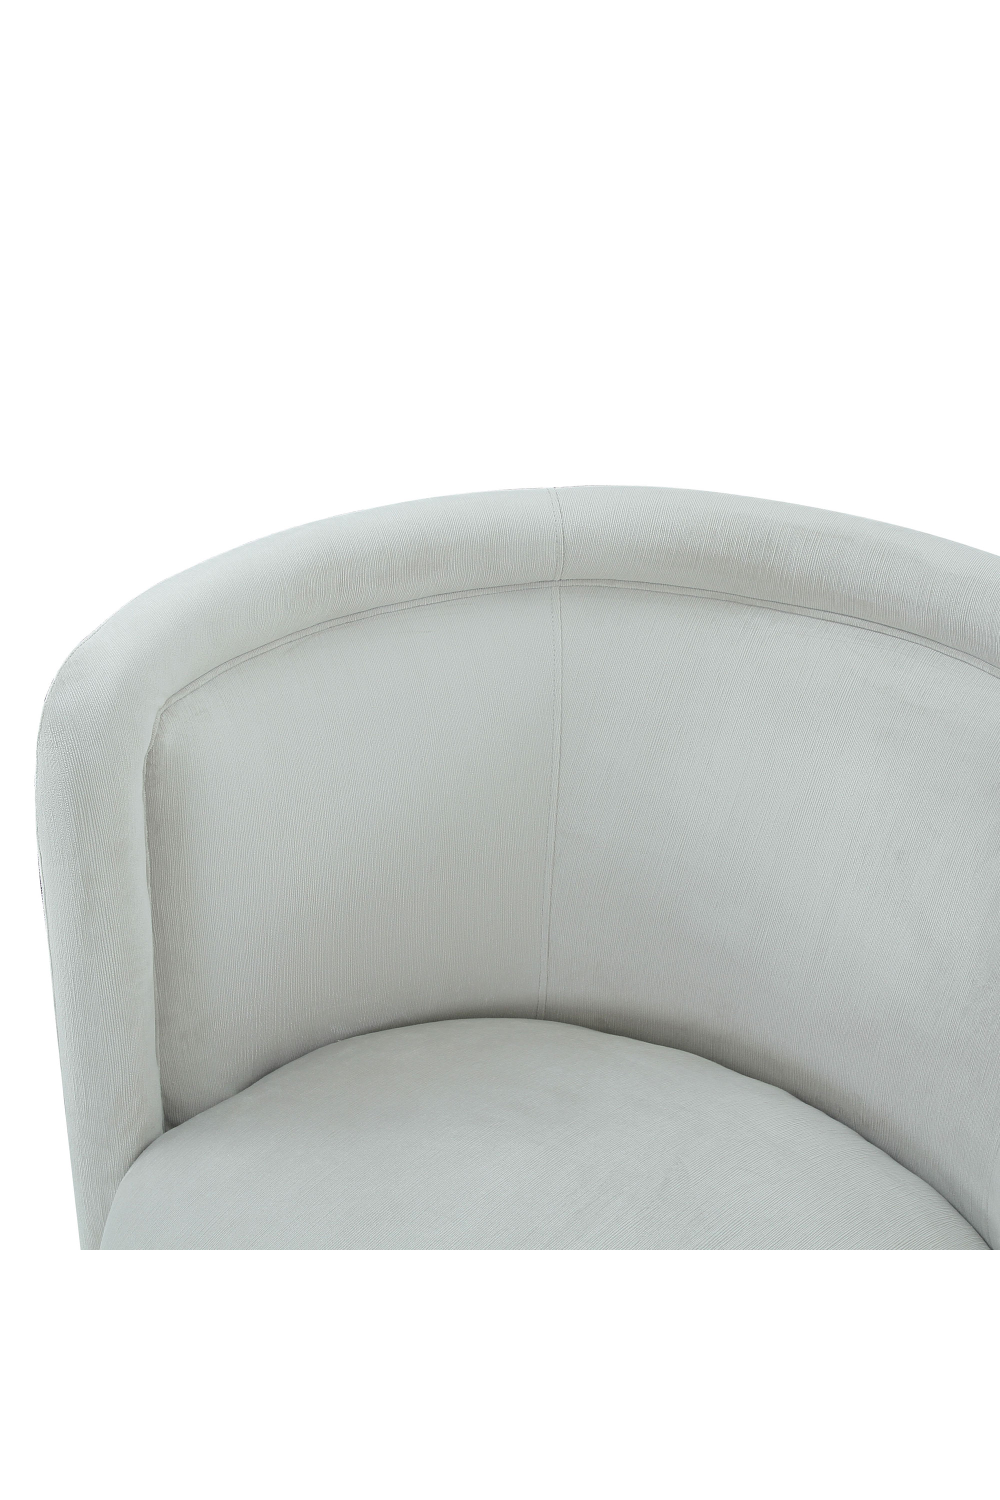 Gray Cocktail Chair with Swivel Base | Andrew Martin Marlow | OROA